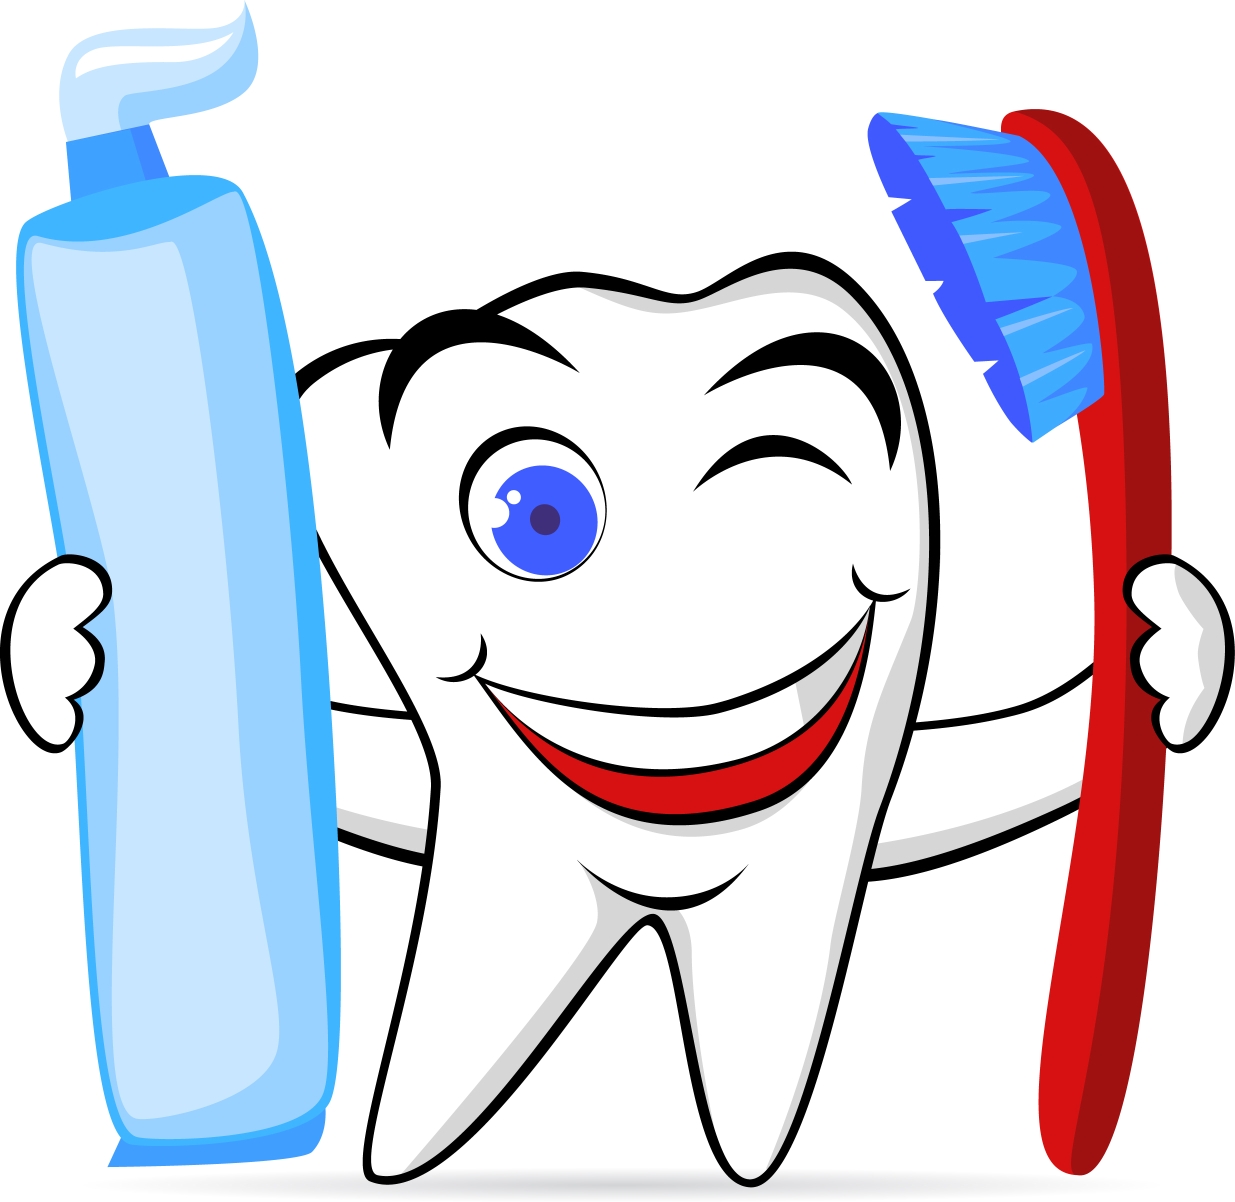 Dental images about dentist clip art on teeth ache 